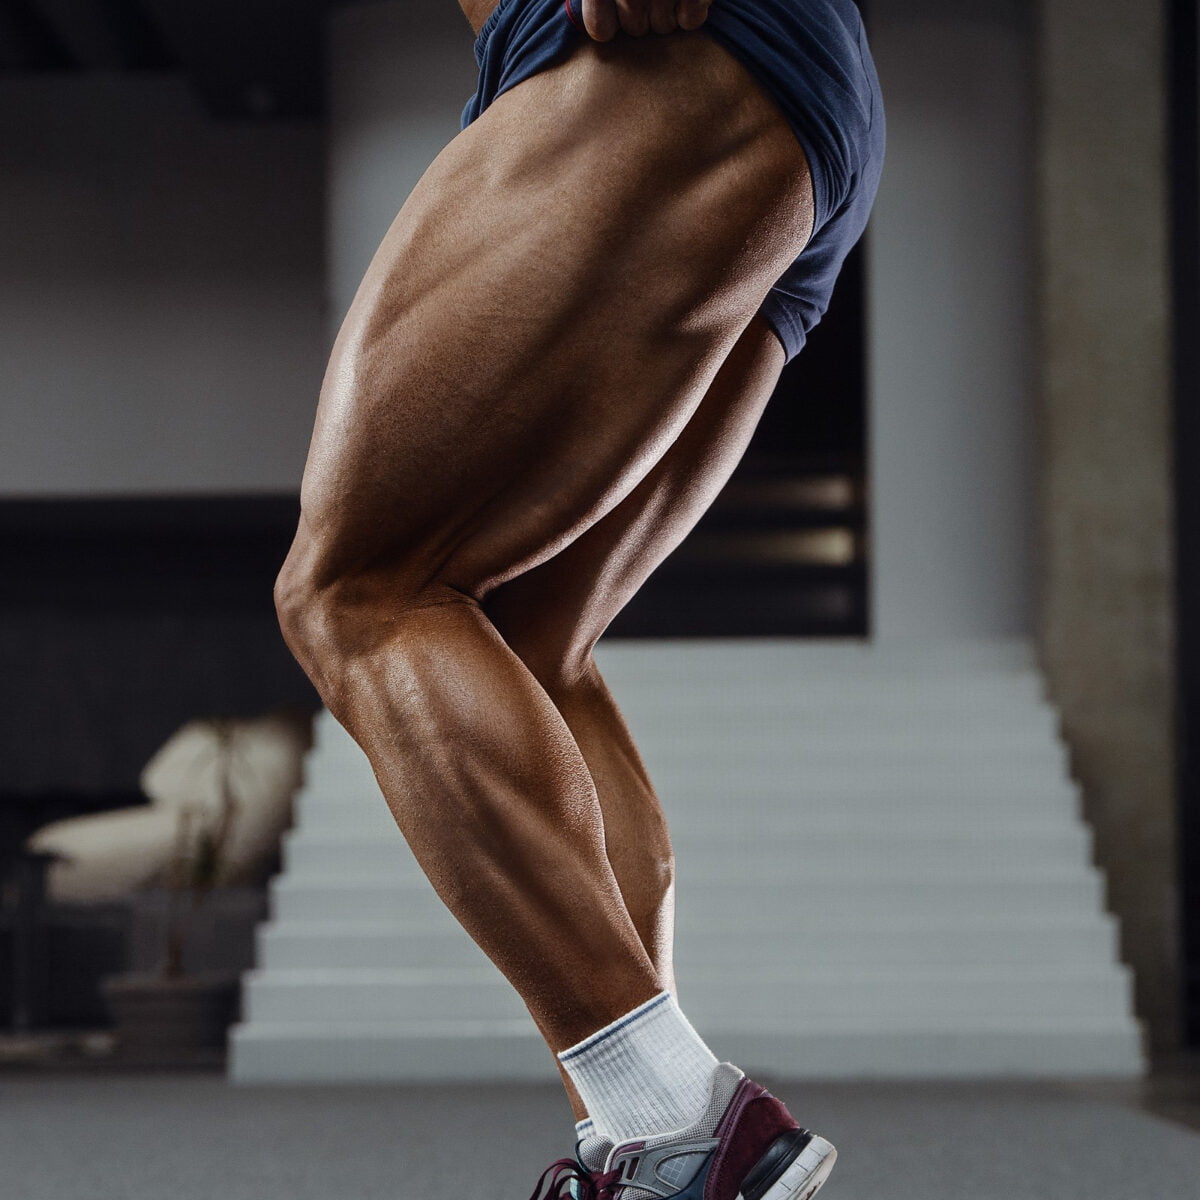 10 Lower Body Compound Exercises For Stronger Legs The Ultimate Guide